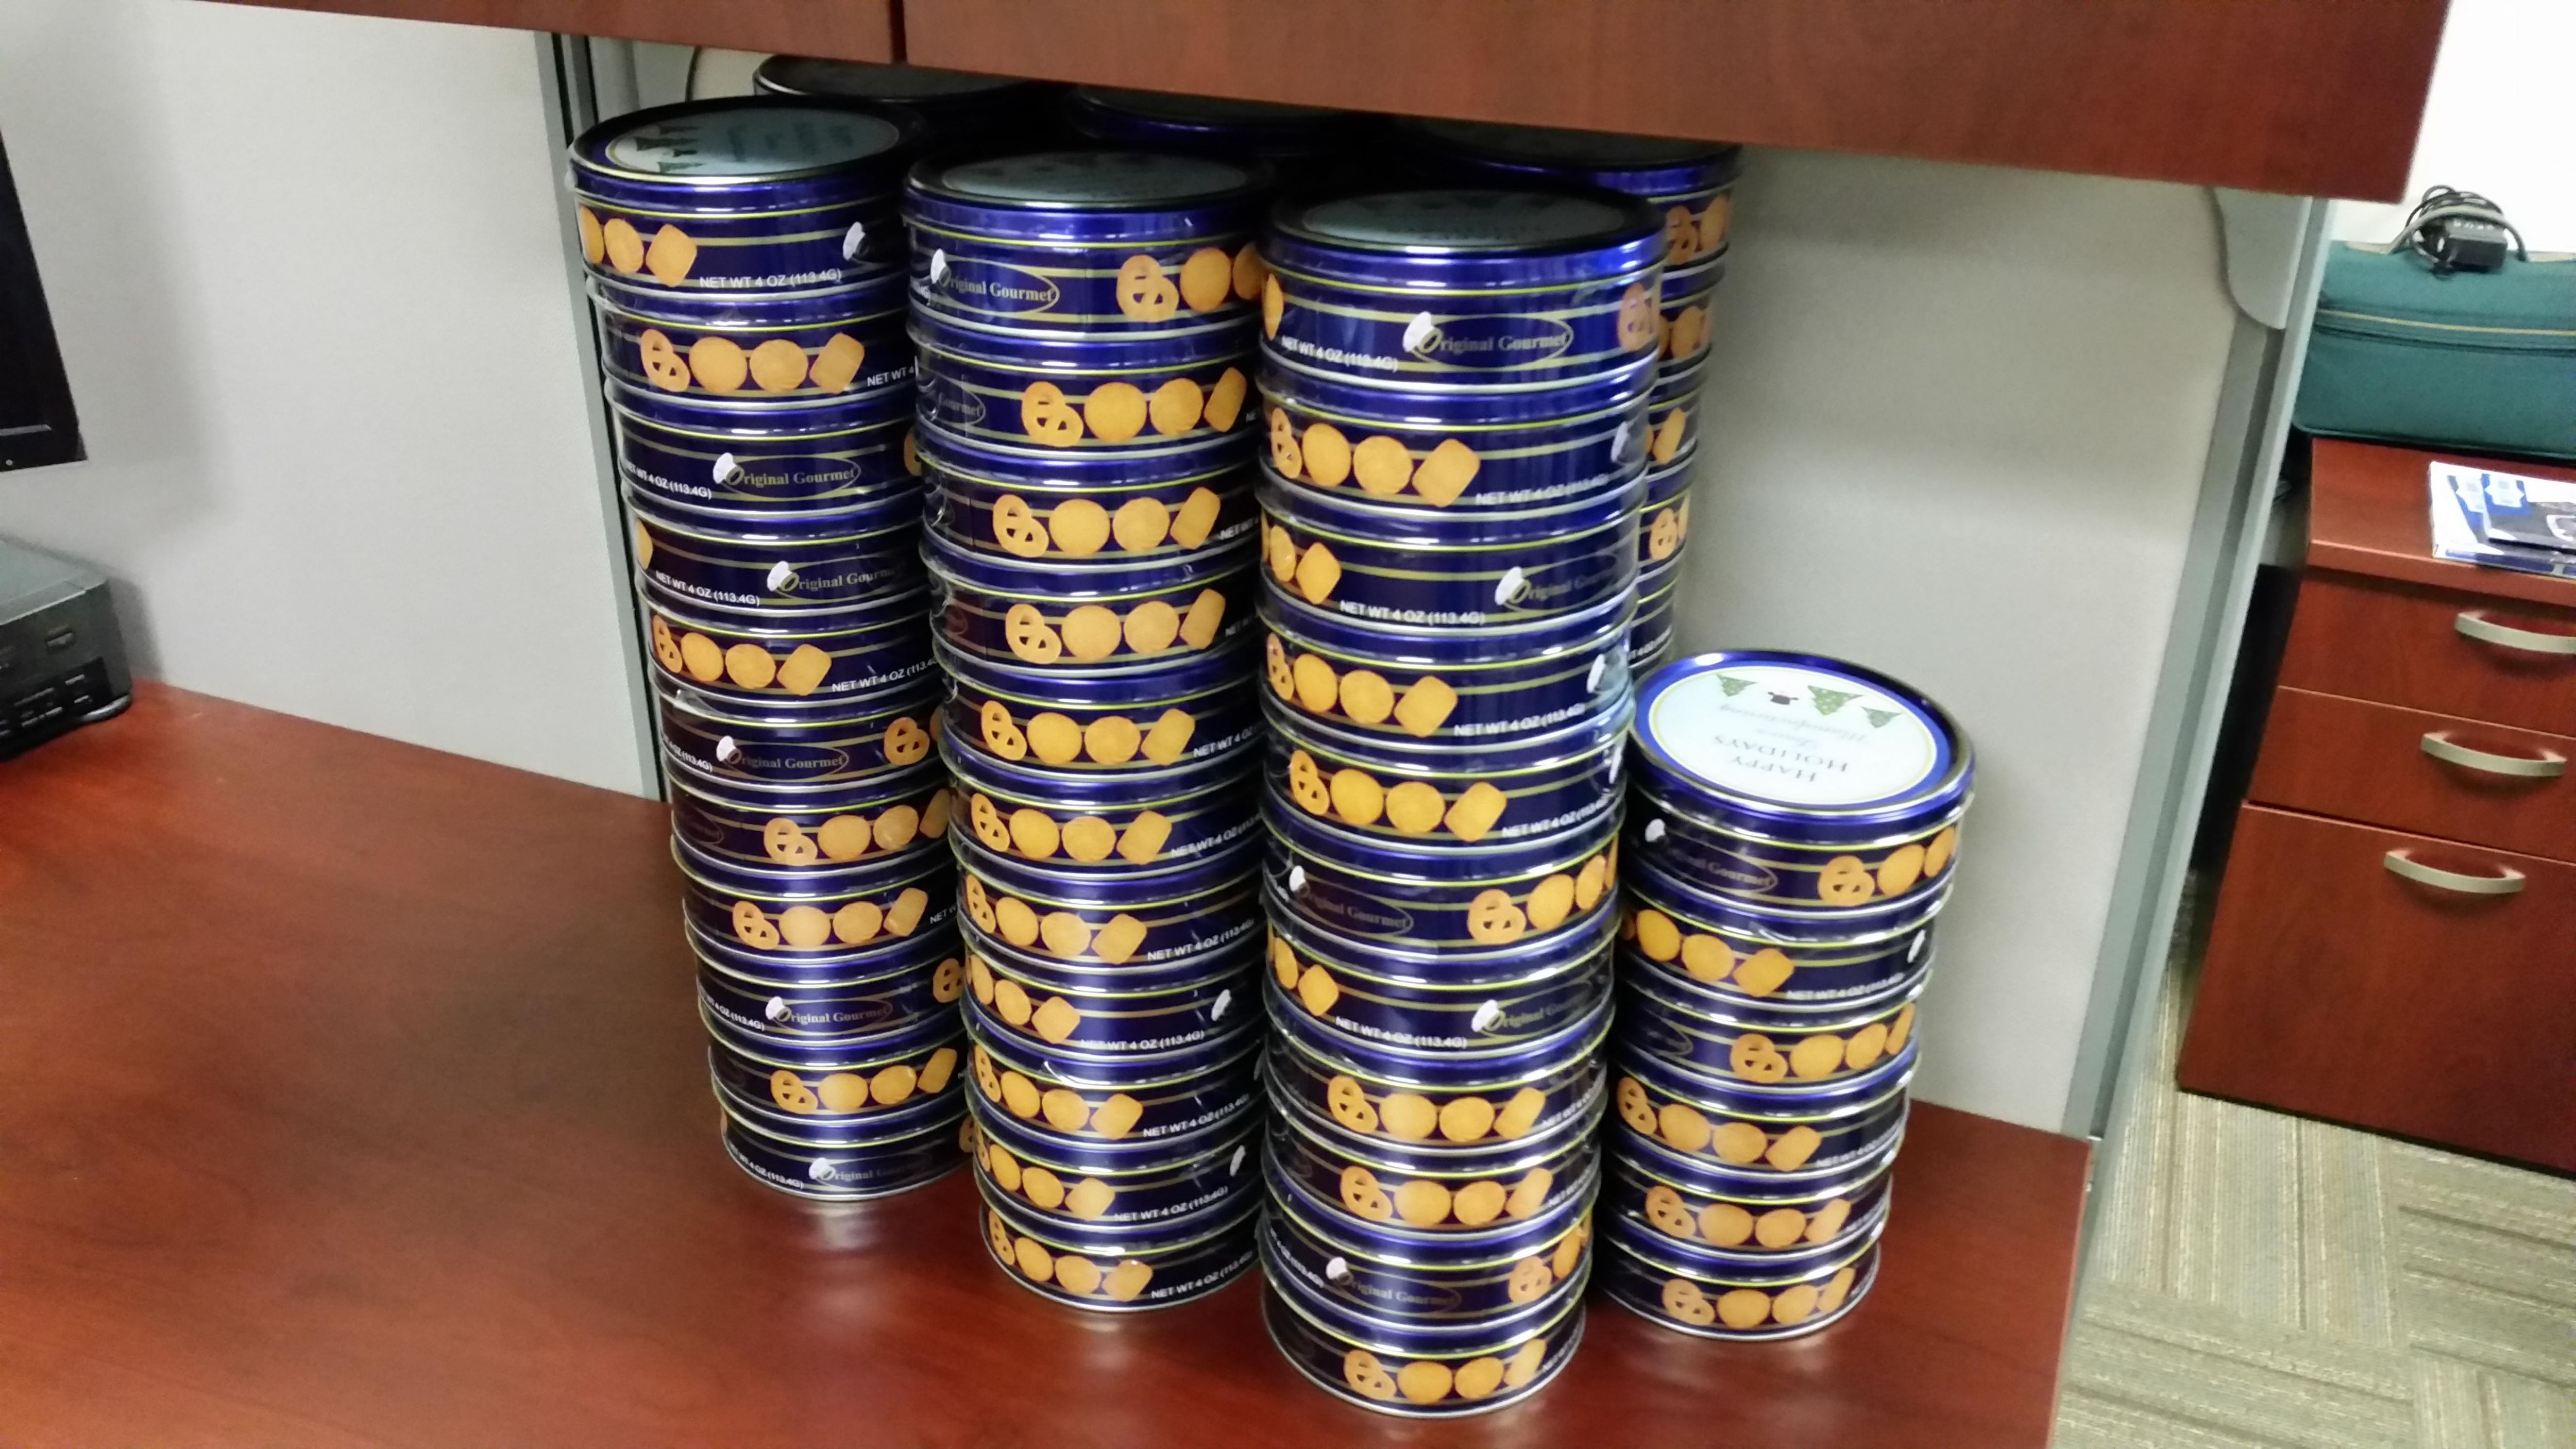 Apparently my company's giving out sewing kits for Christmas